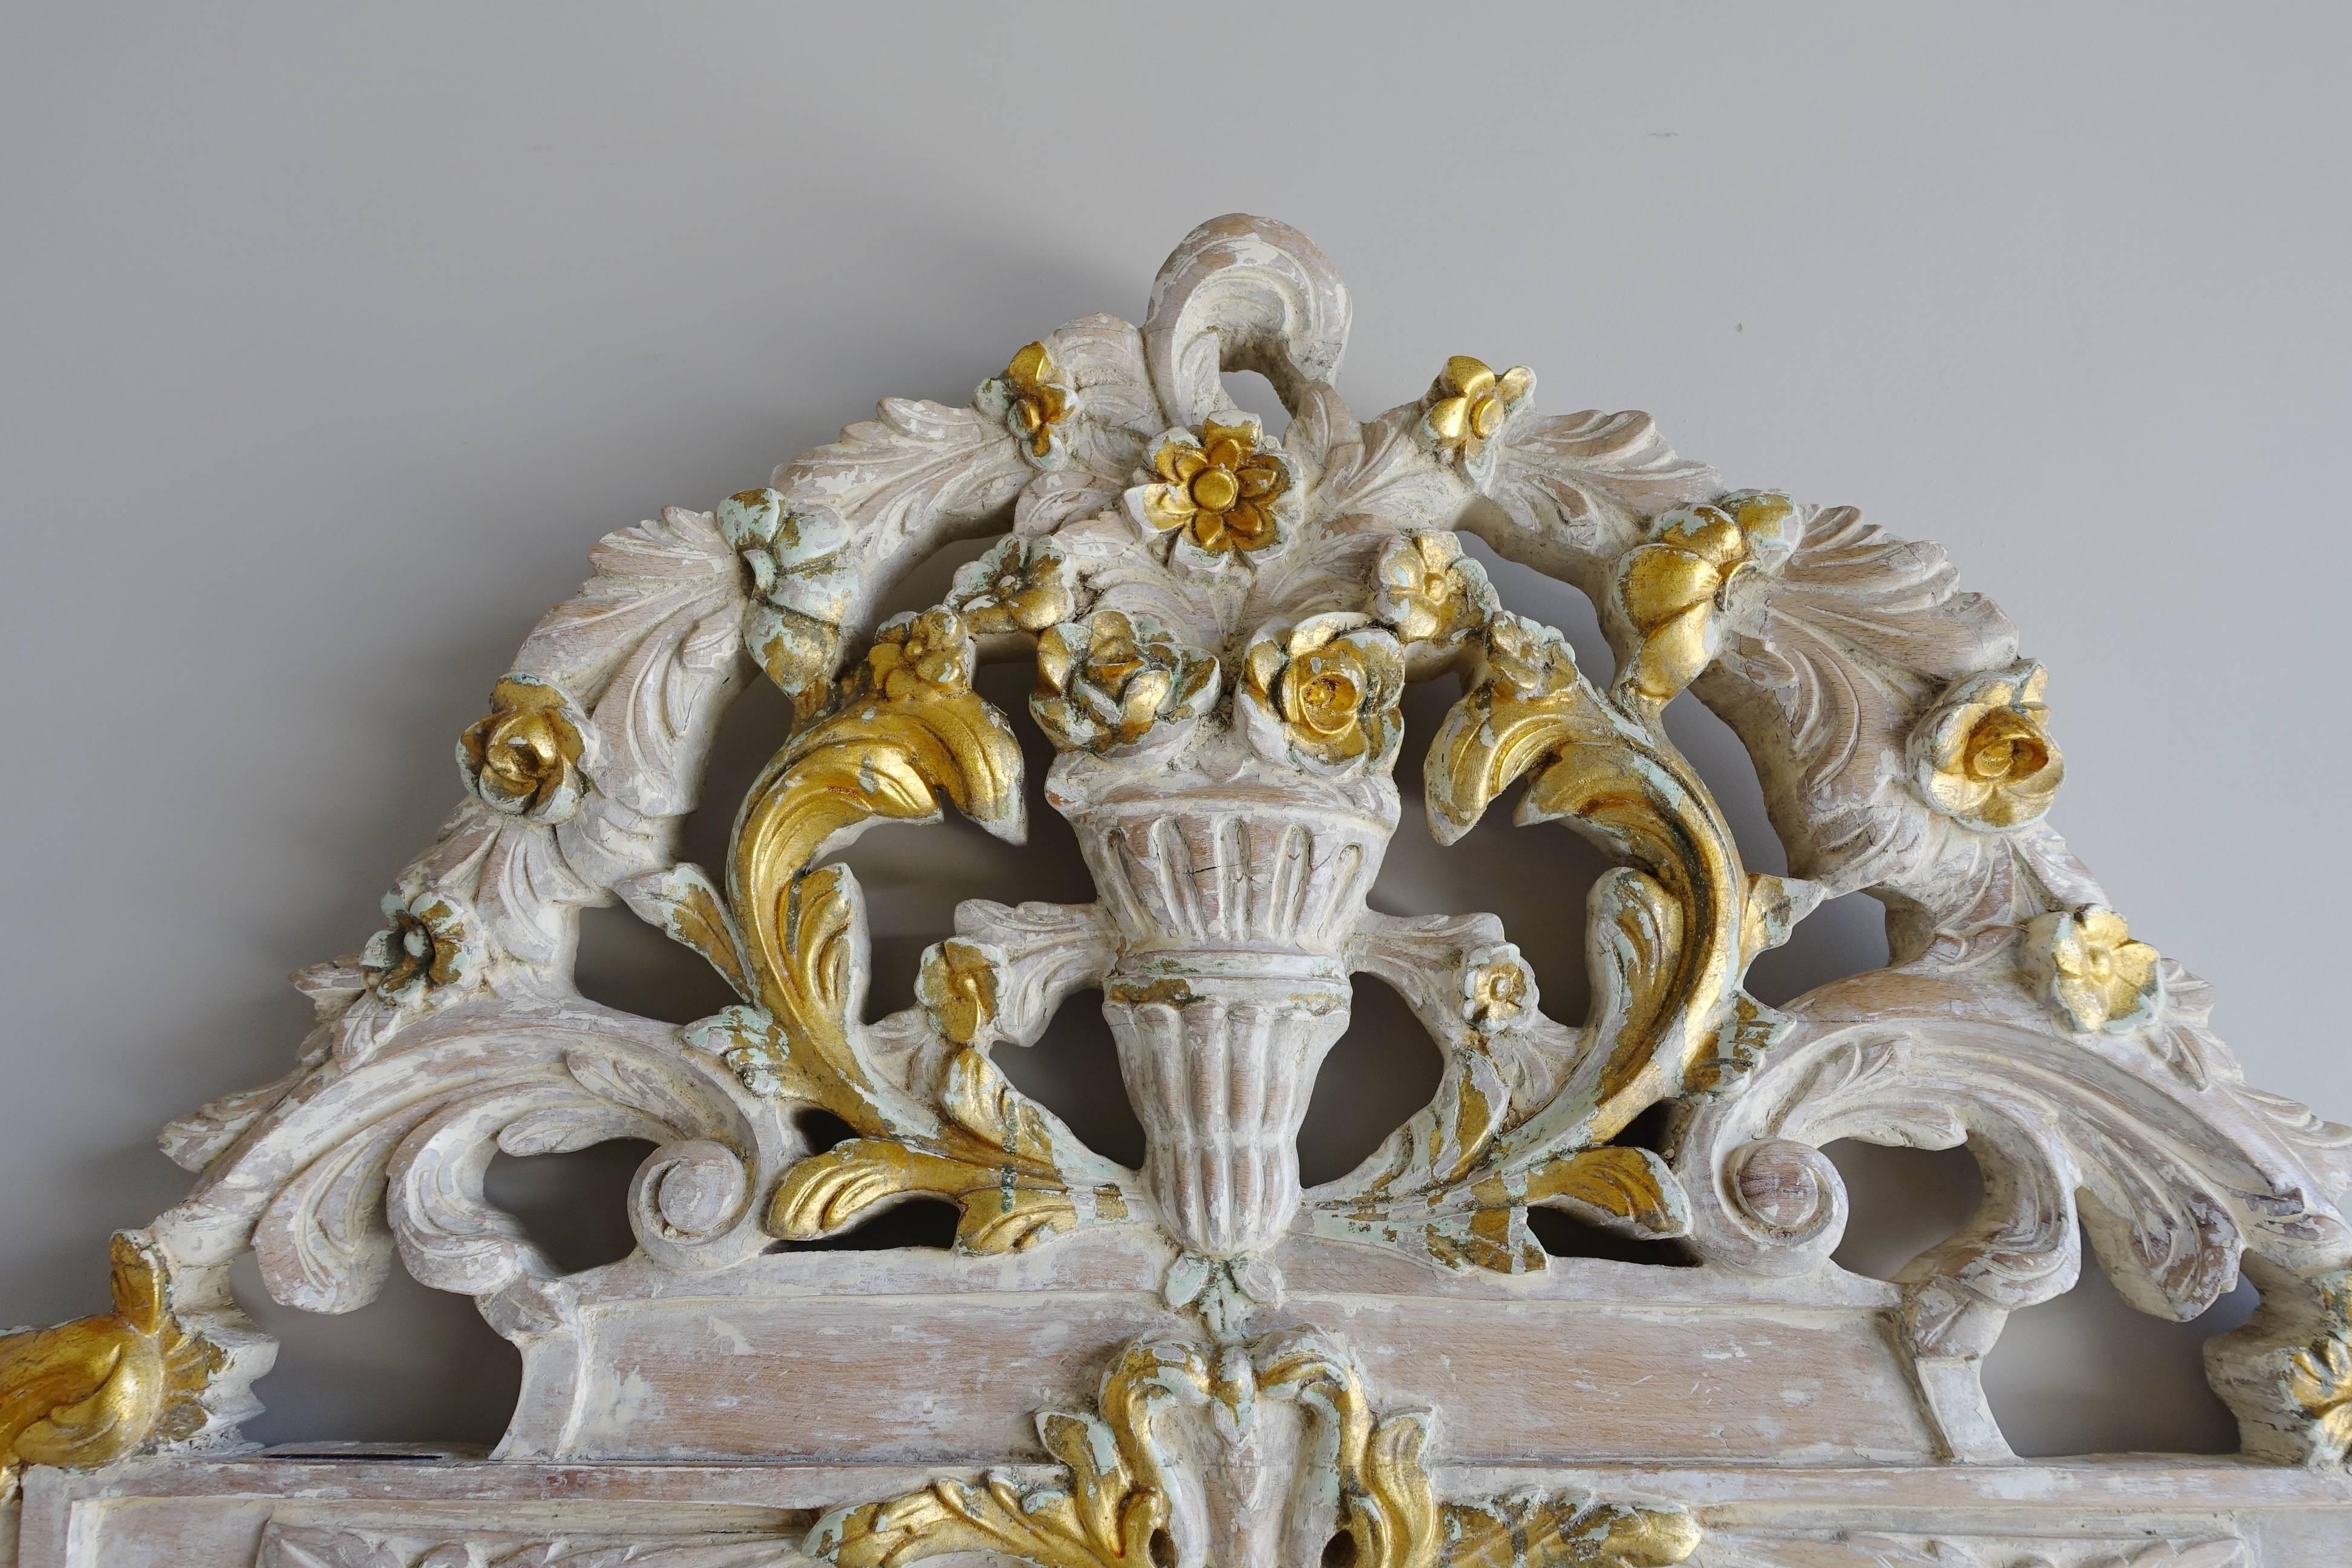 French Rococo style hand-carved white washed and parcel-gilt headboard. The center urn of flowers is surrounded by garlands of flowers cascading down with delicate roses and acanthus leaves swirling throughout.